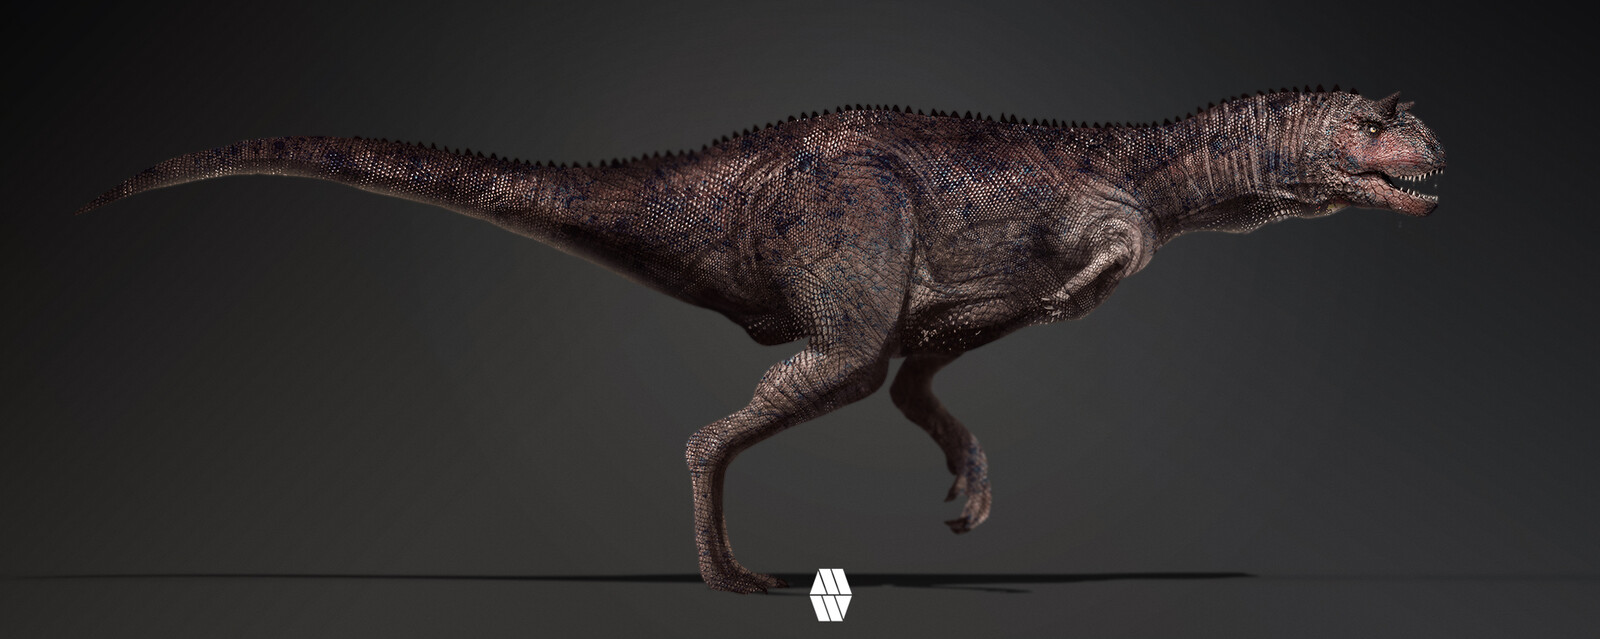 Carnotaurus concept - Personal Project 